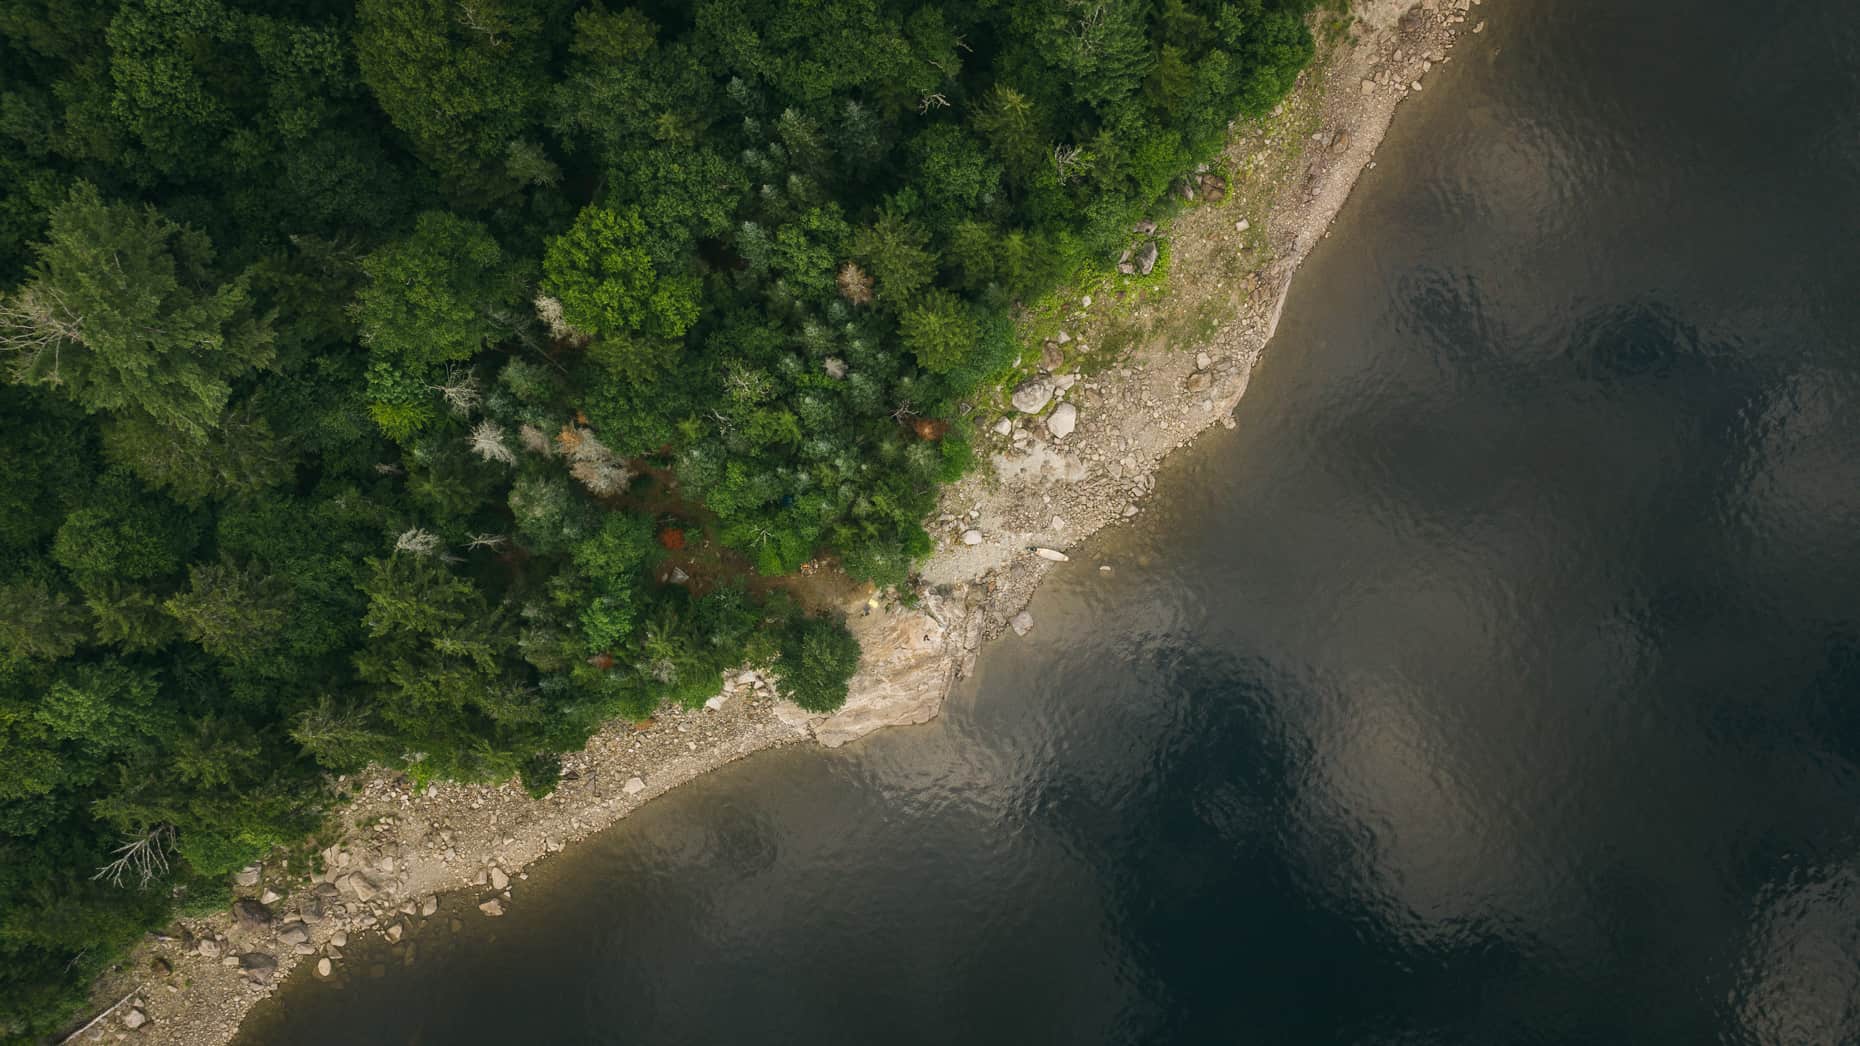 Top down view of Beaver Island on Aziscohos Lake